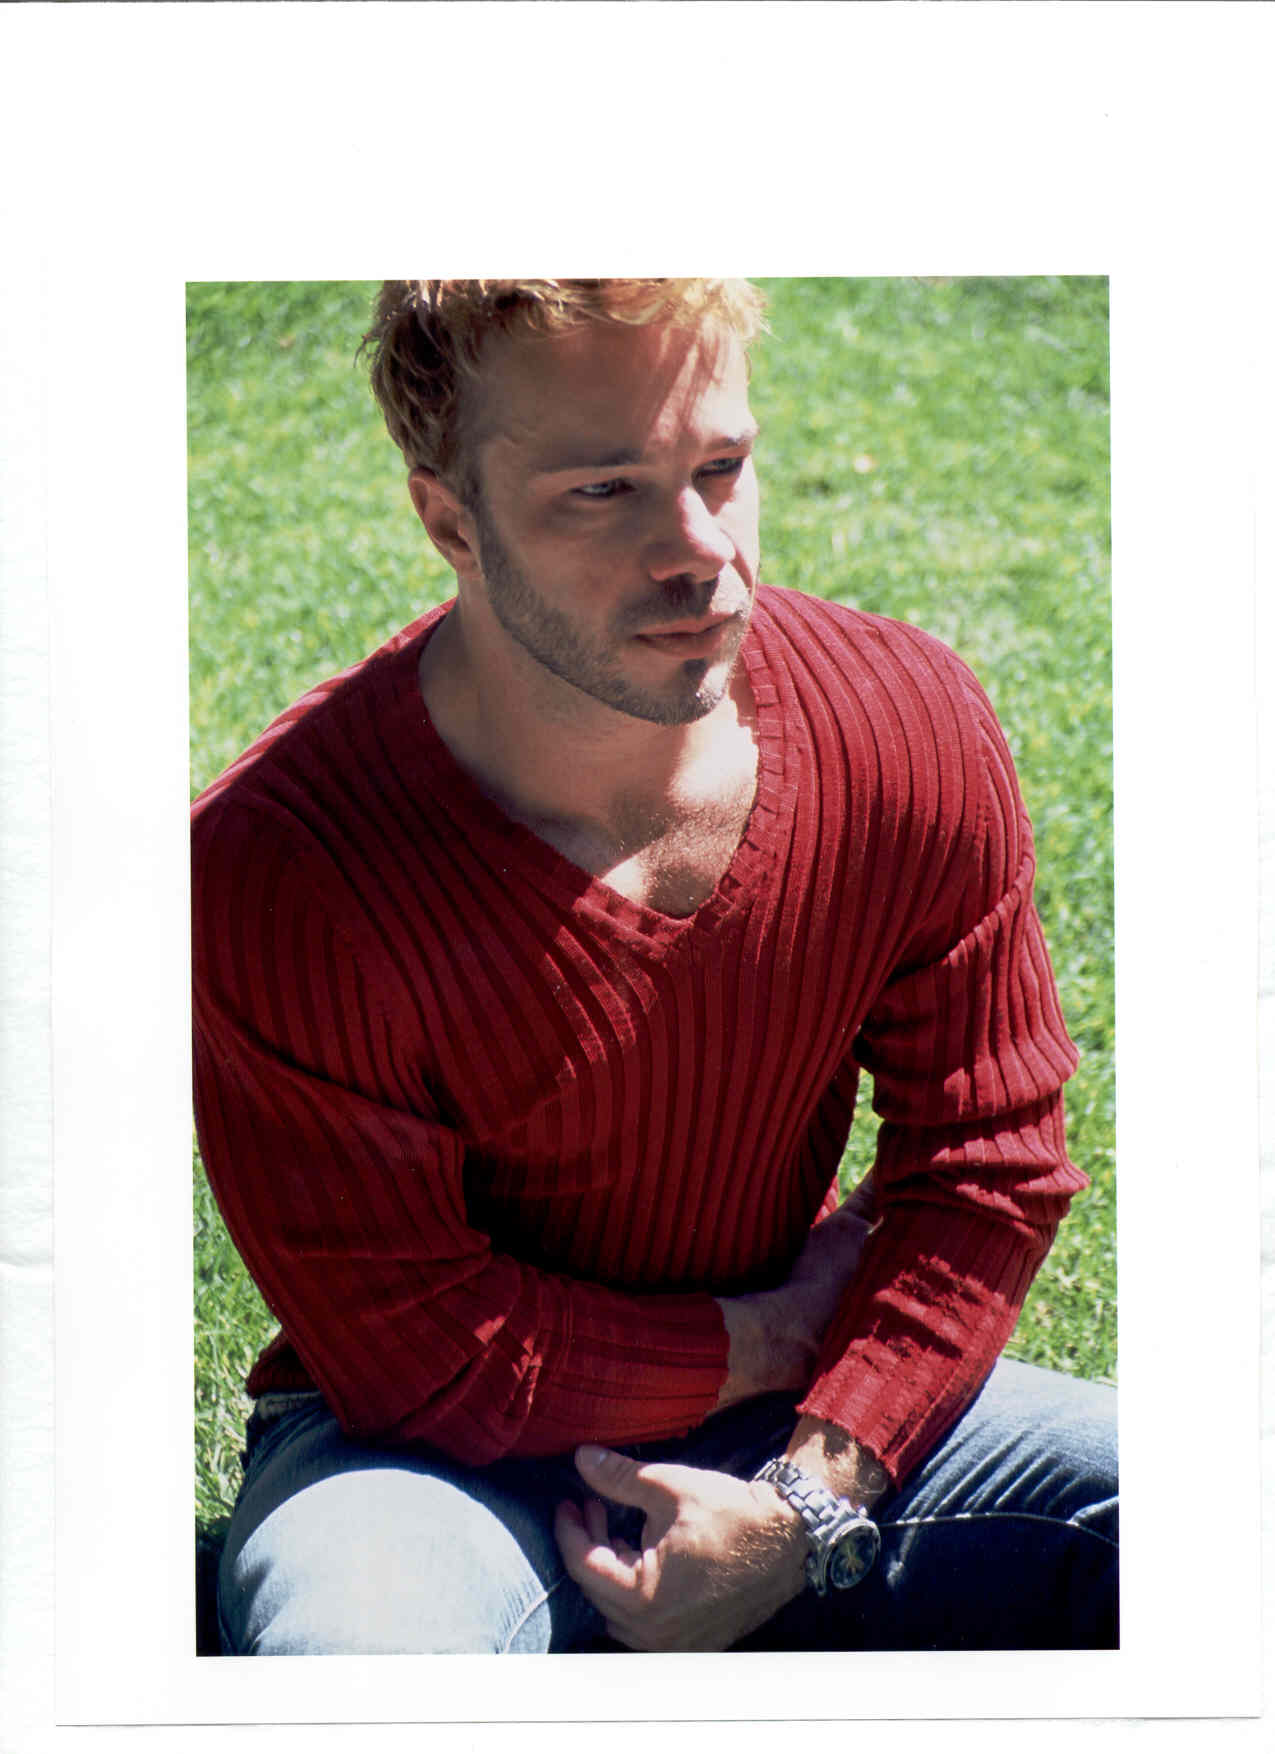 Fashion Print Add wearing Tom Ford for Gucci, silk red sweater.